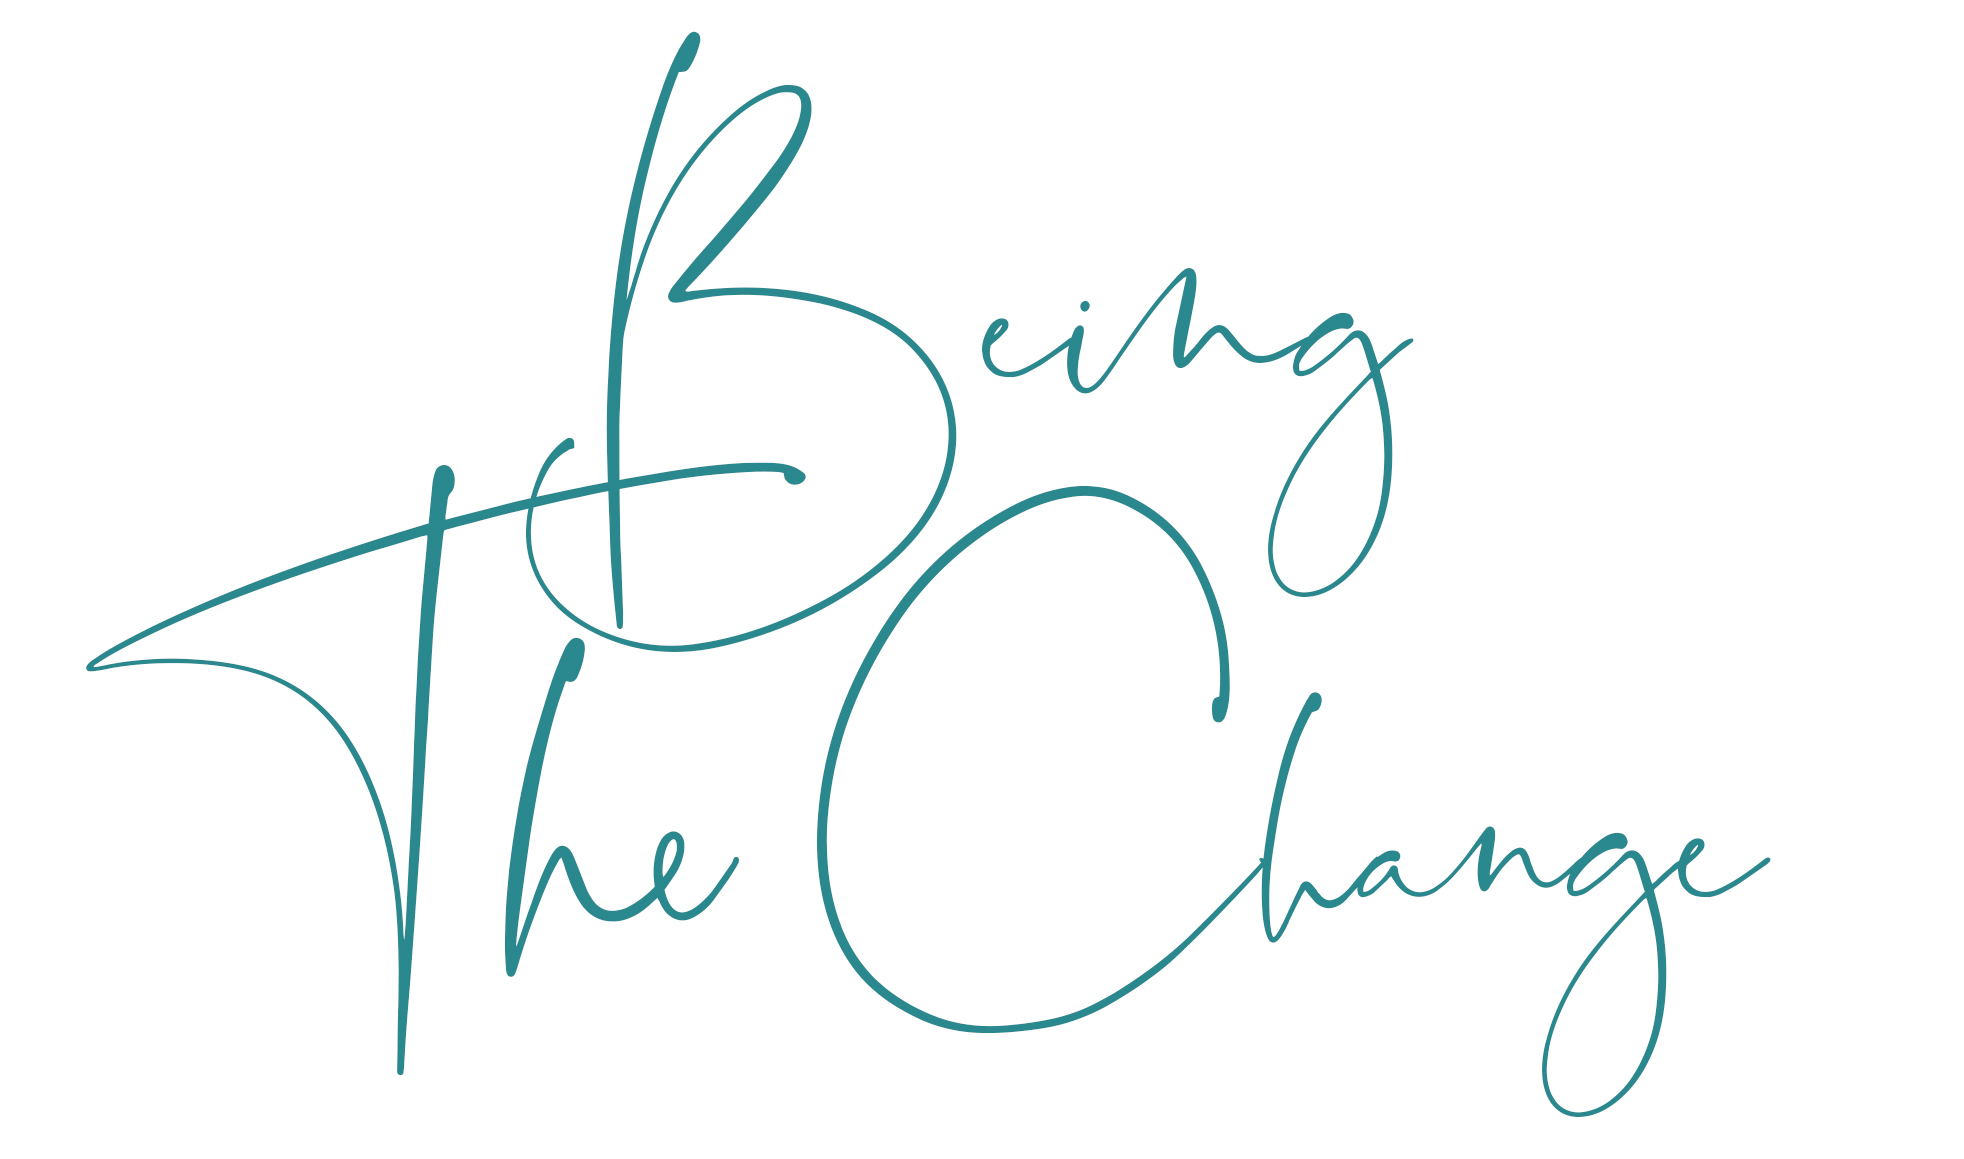 Being The Change logo